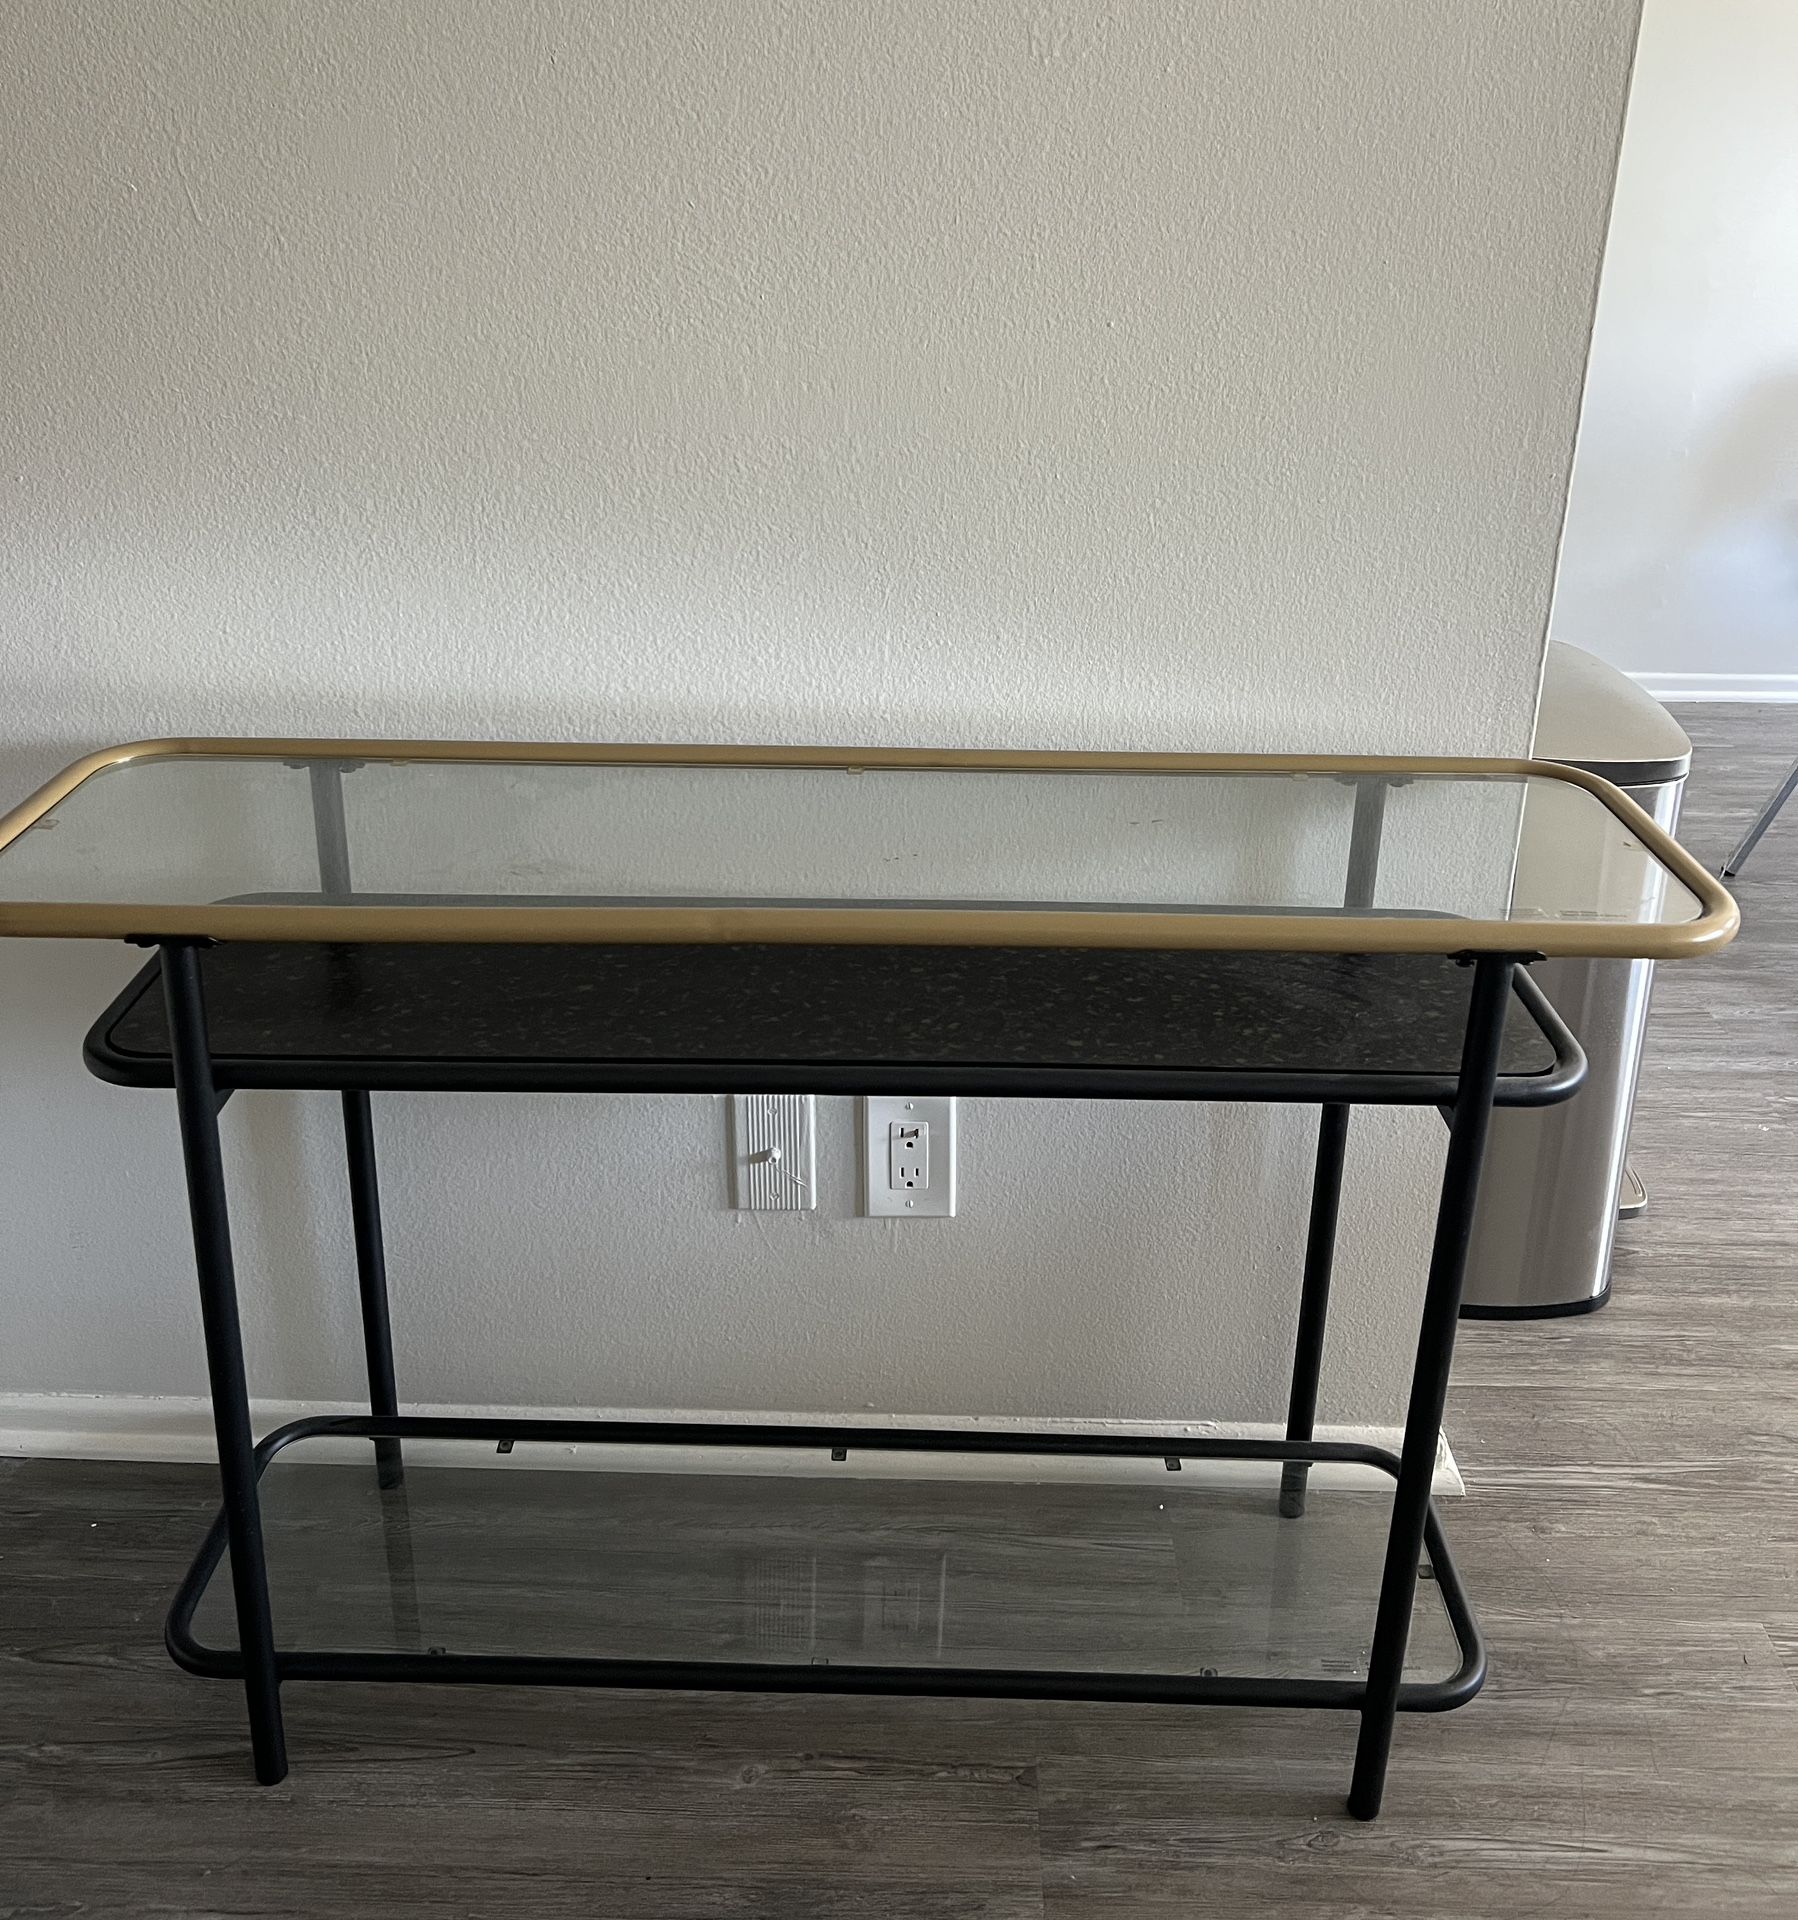 MUST PICK UP TODAY - Black & Gold Console Table